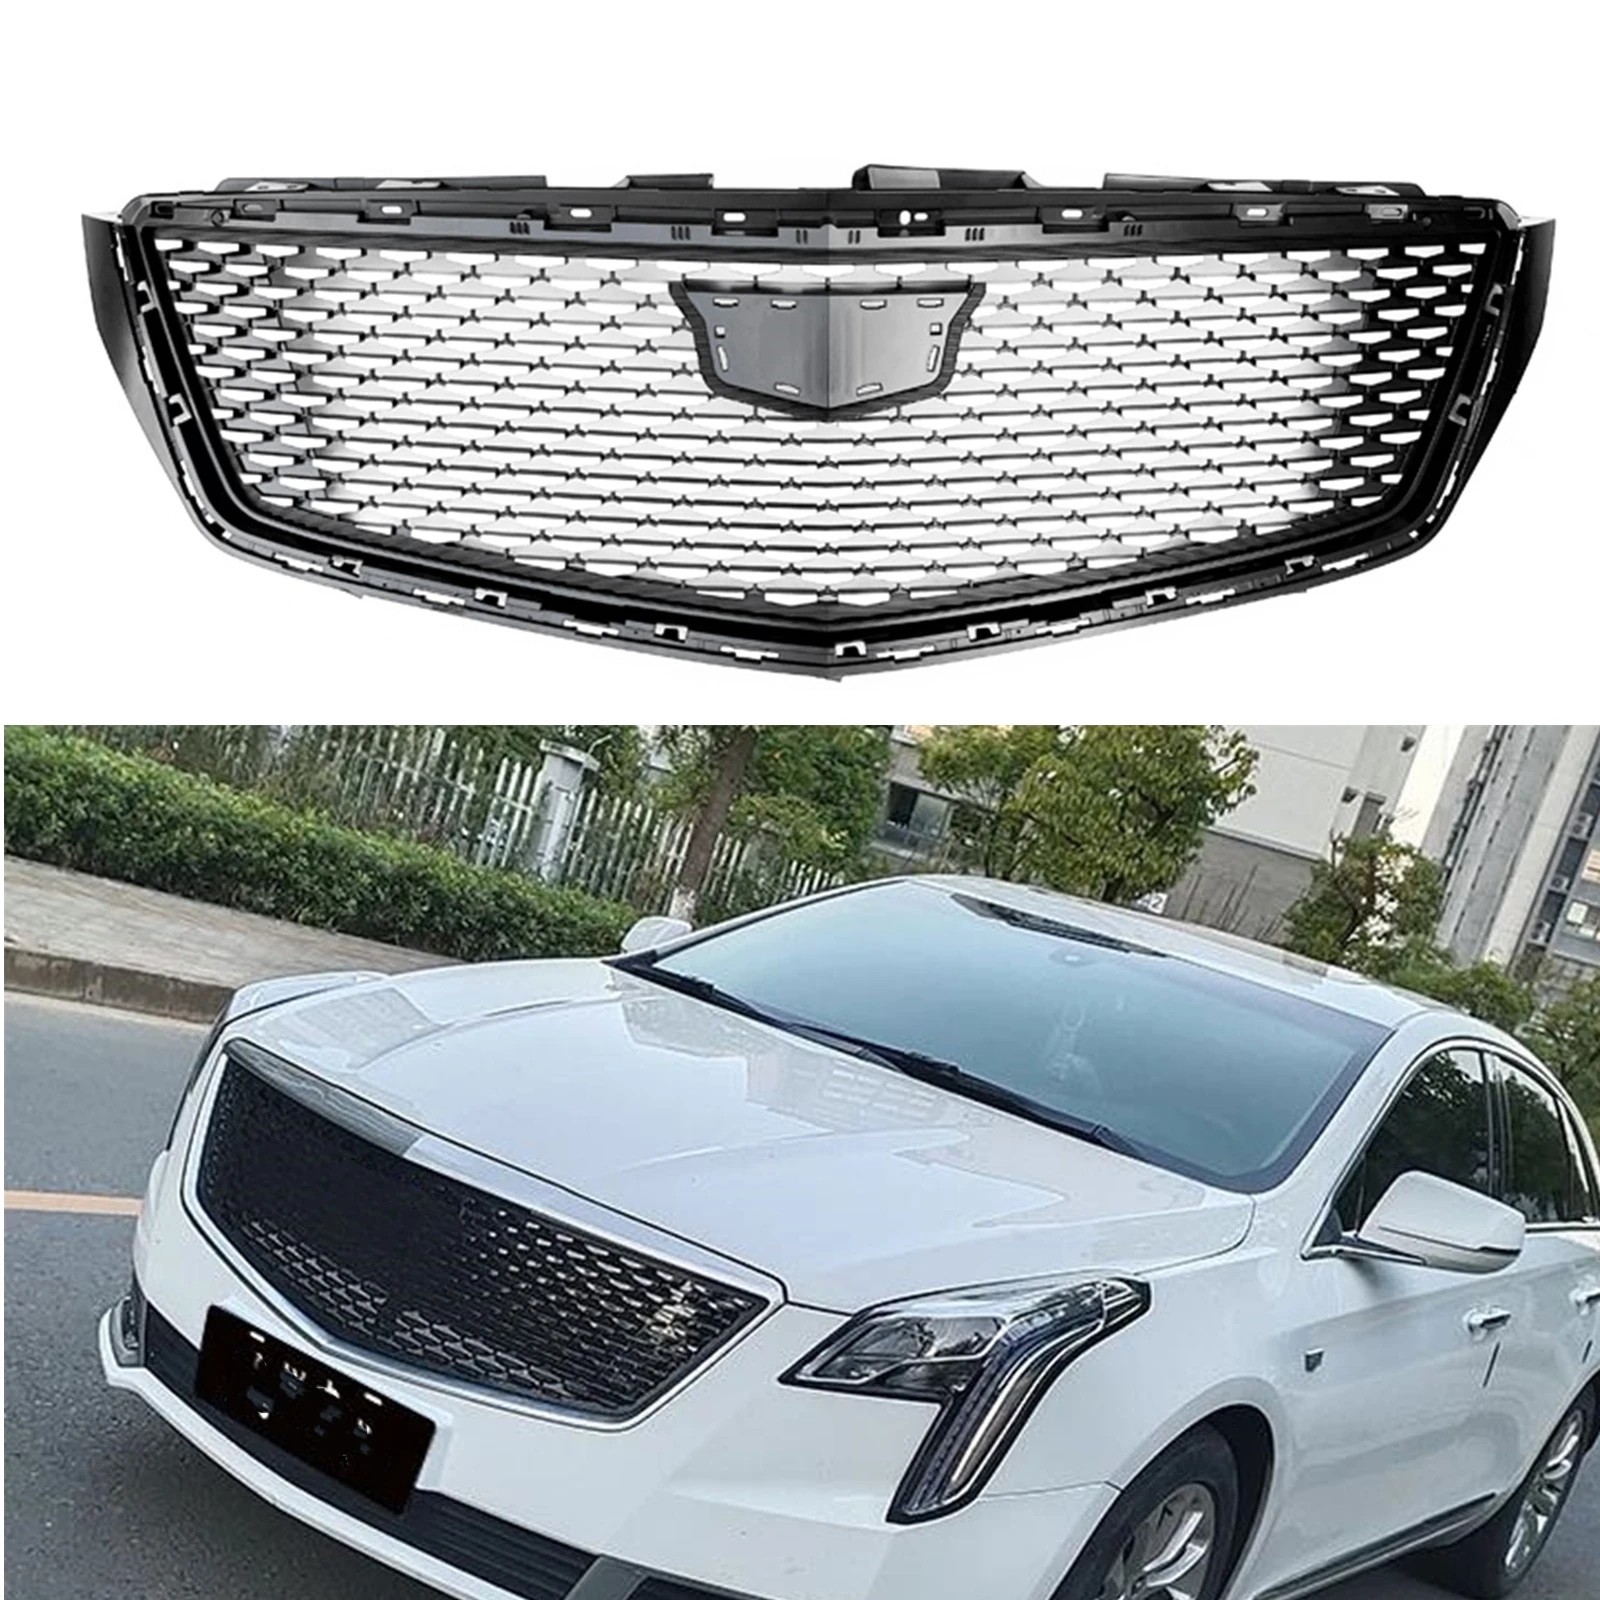 

Front Grille Racing Grills For Cadillac XTS 2018-2020 Silver Diamond Style Car Upper Bumper Hood Mesh Grid Replacement Body Kit